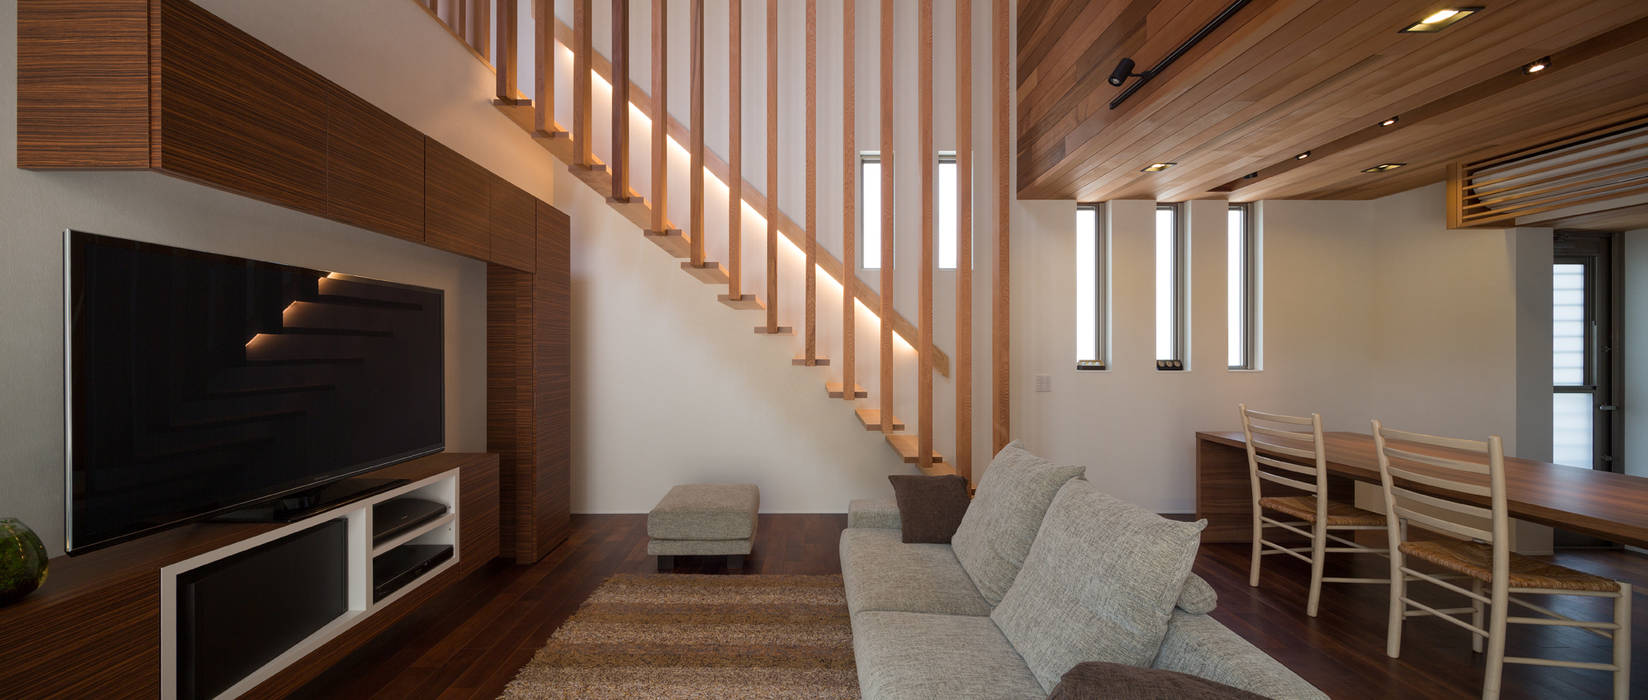 M4-house 「重なり合う家」, Architect Show Co.,Ltd Architect Show Co.,Ltd Casas modernas